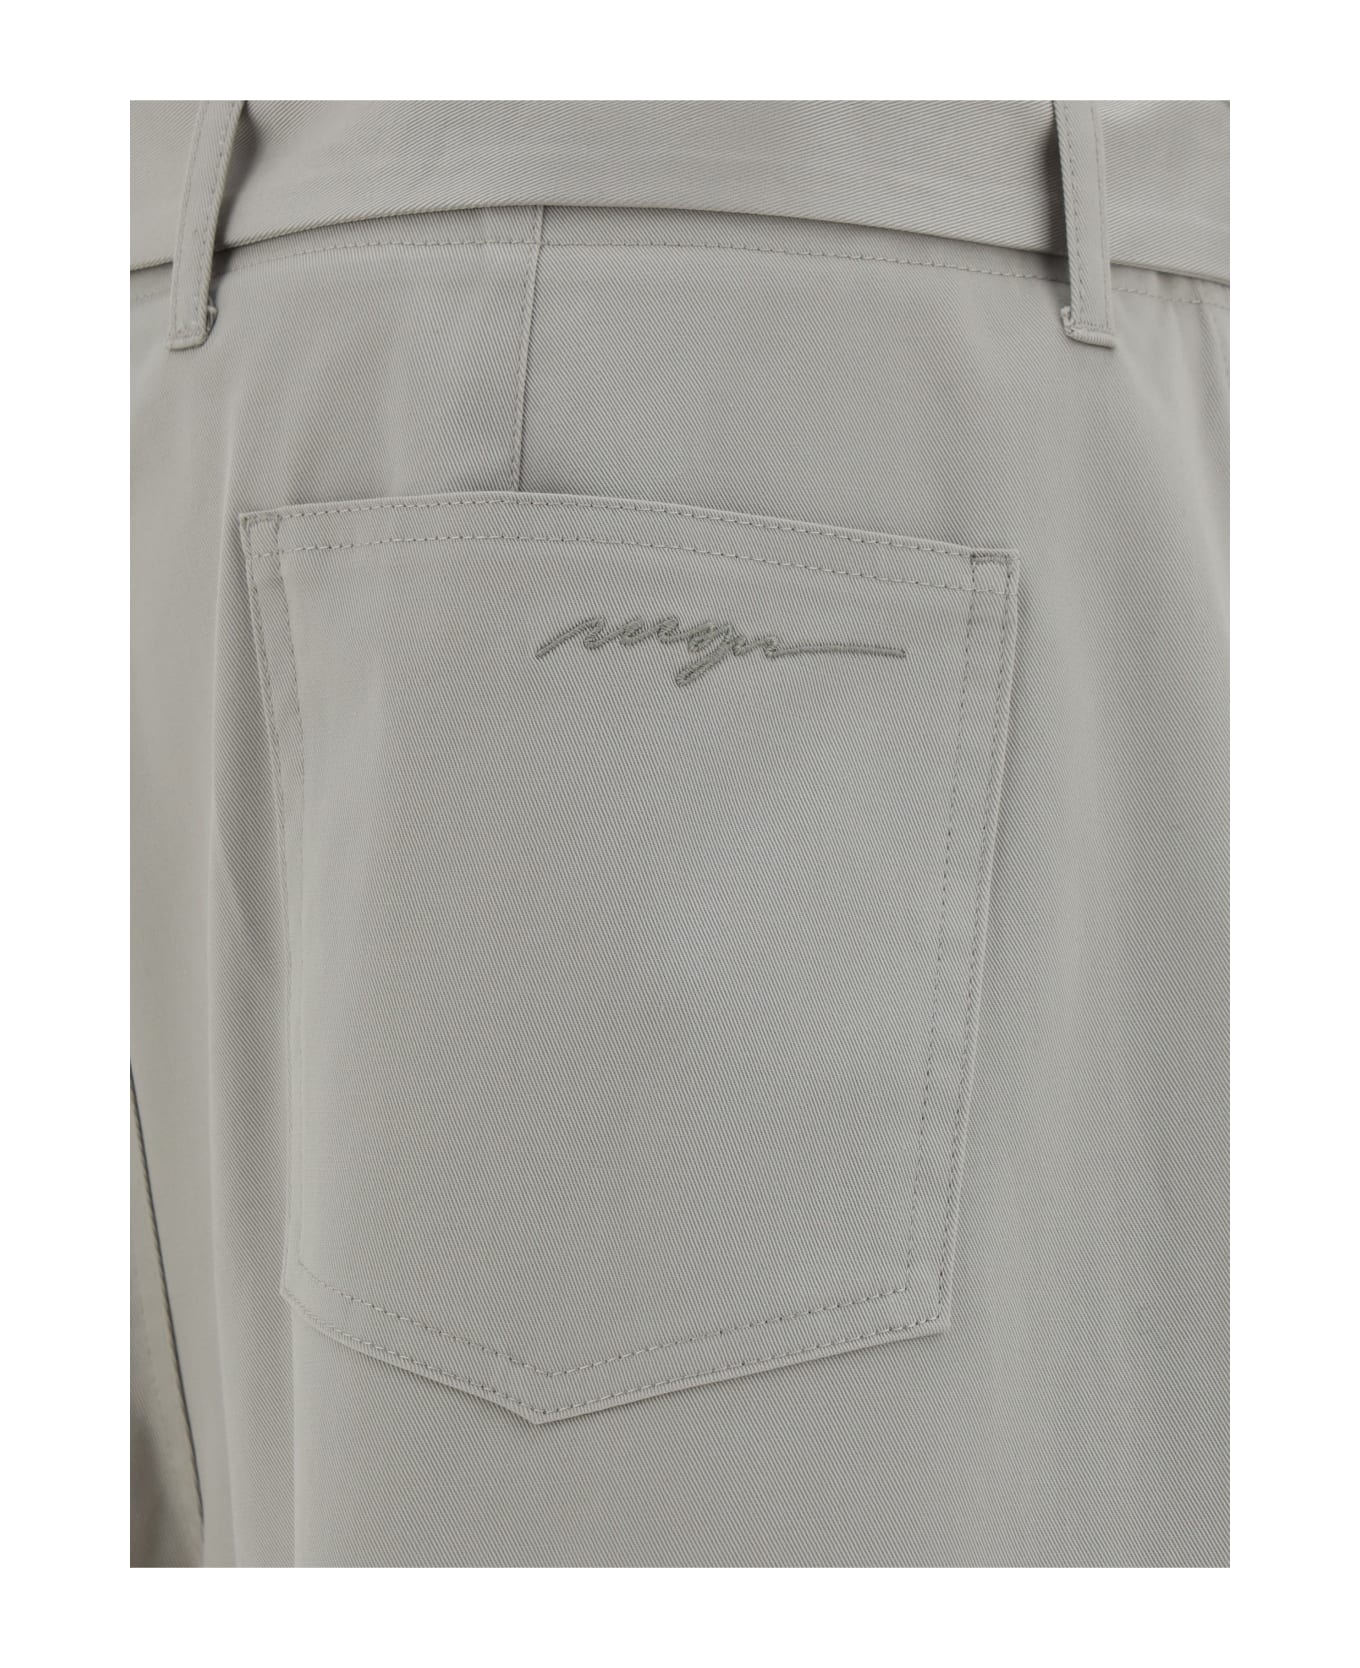 MSGM Belted Trousers - Light Grey